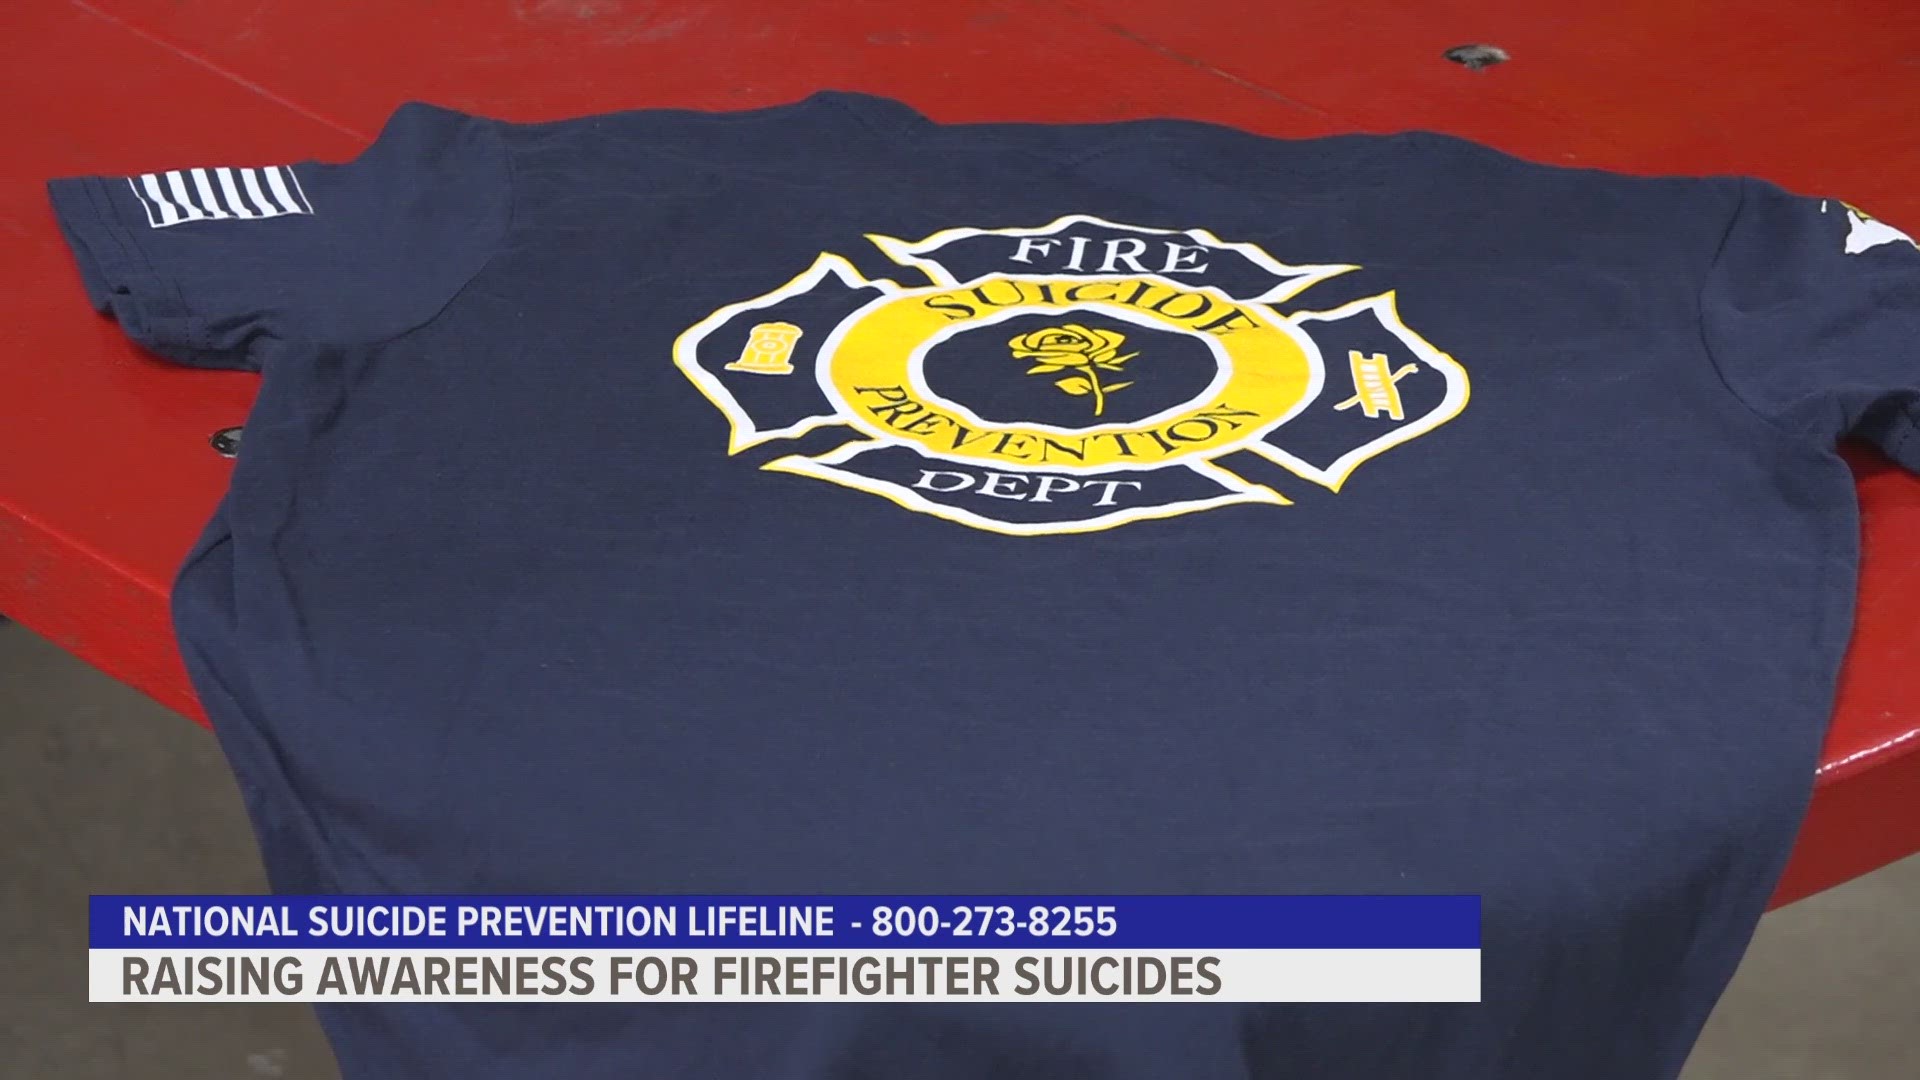 Several Muskegon Co. stations are bringing awareness to these daunting statistics by wearing ‘The Yellow Rose’ shirts in support of mental health.